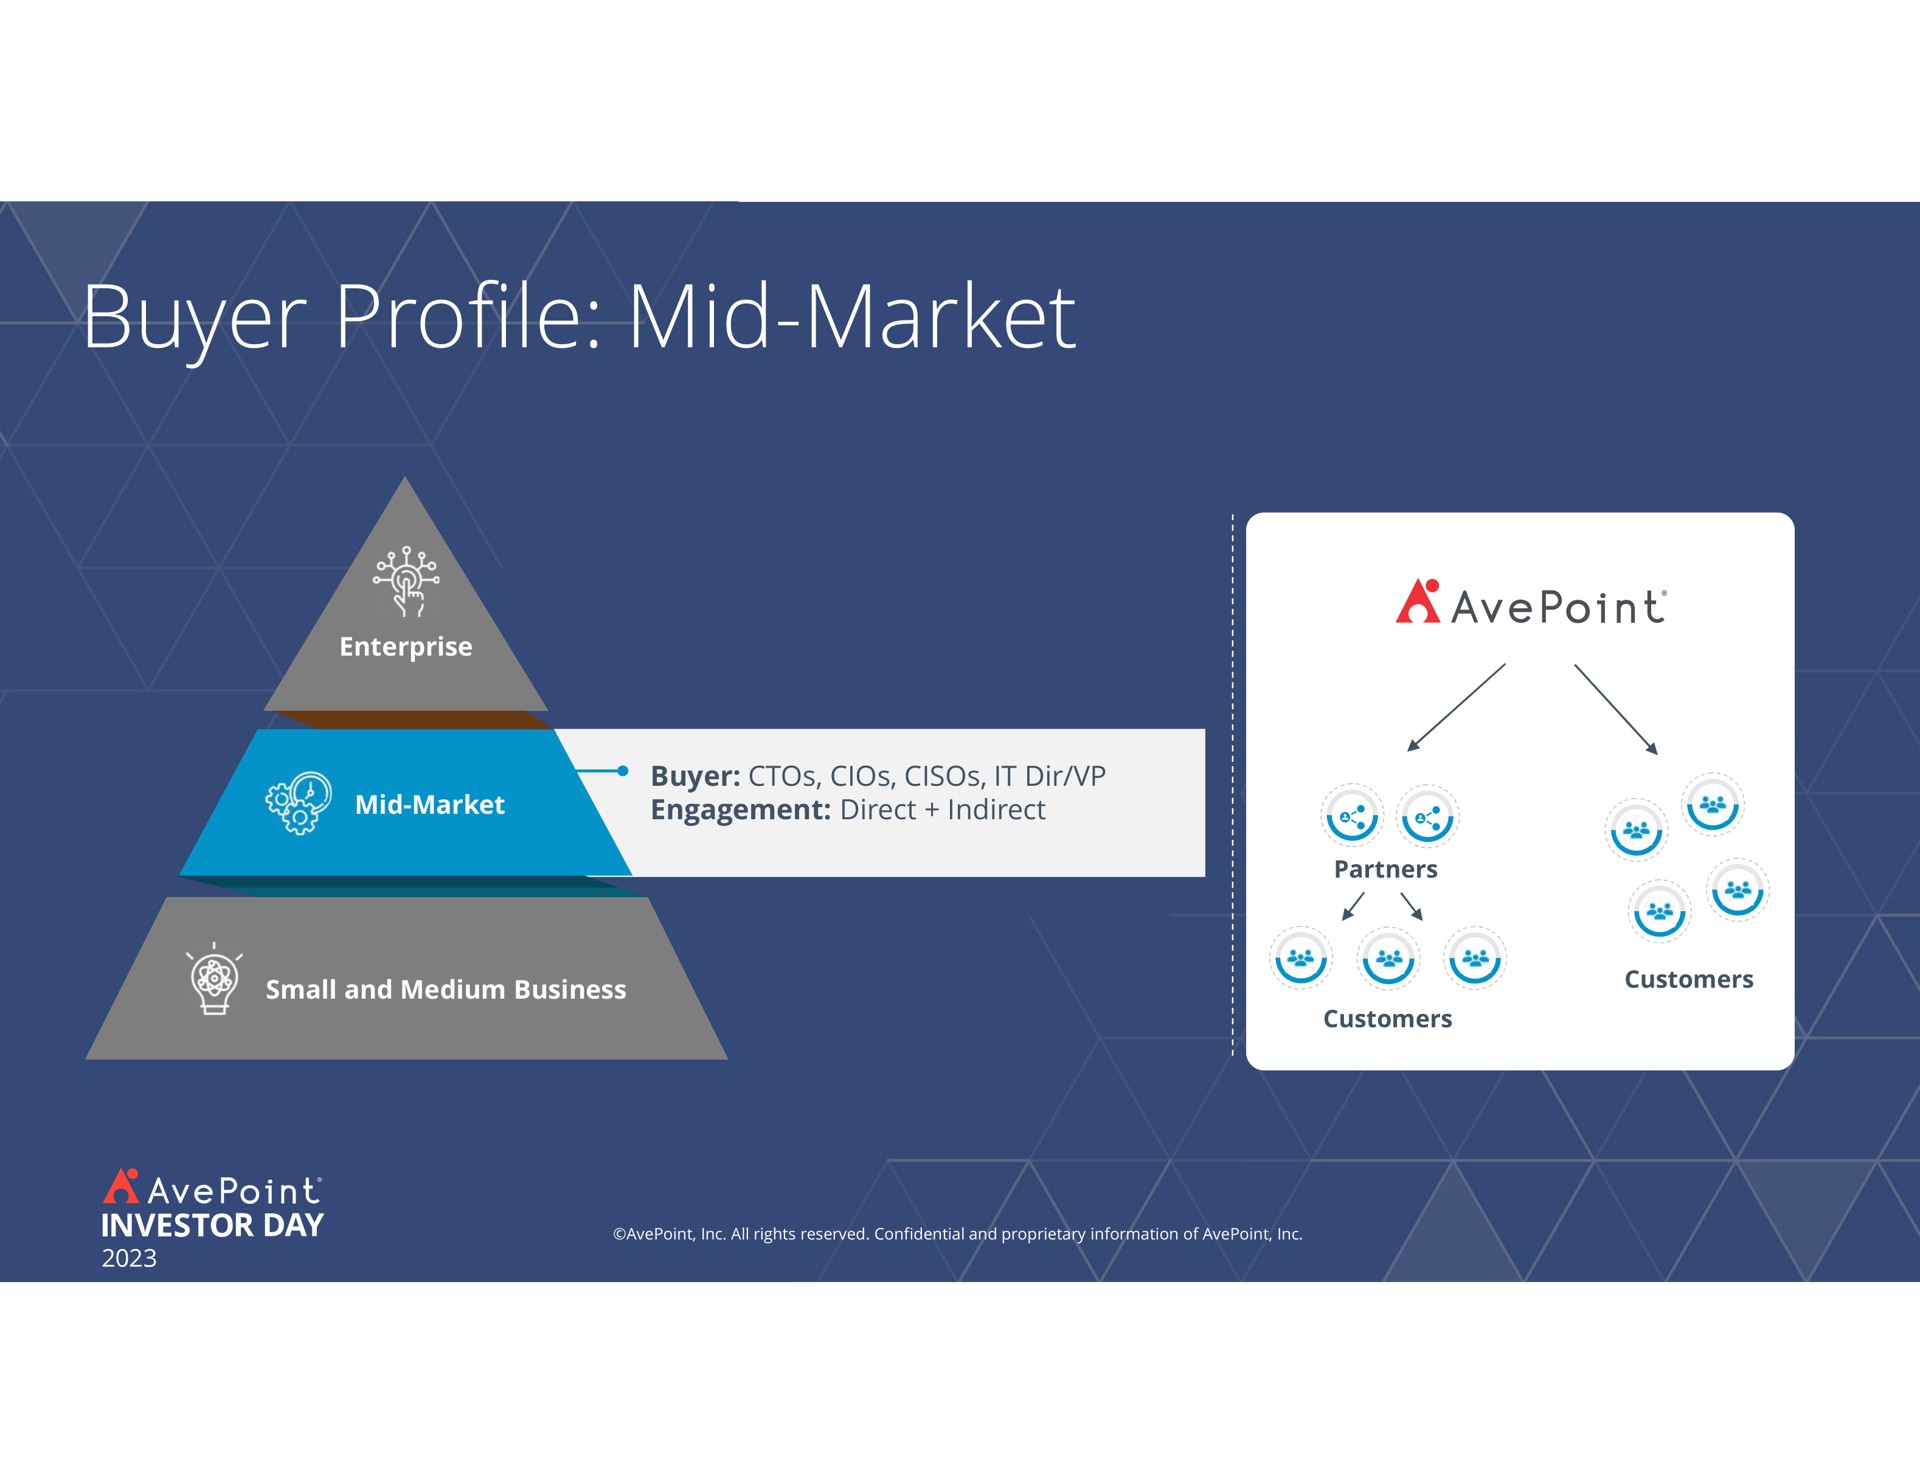 buyer profile mid market engagement direct indirect a ret is wey | AvePoint